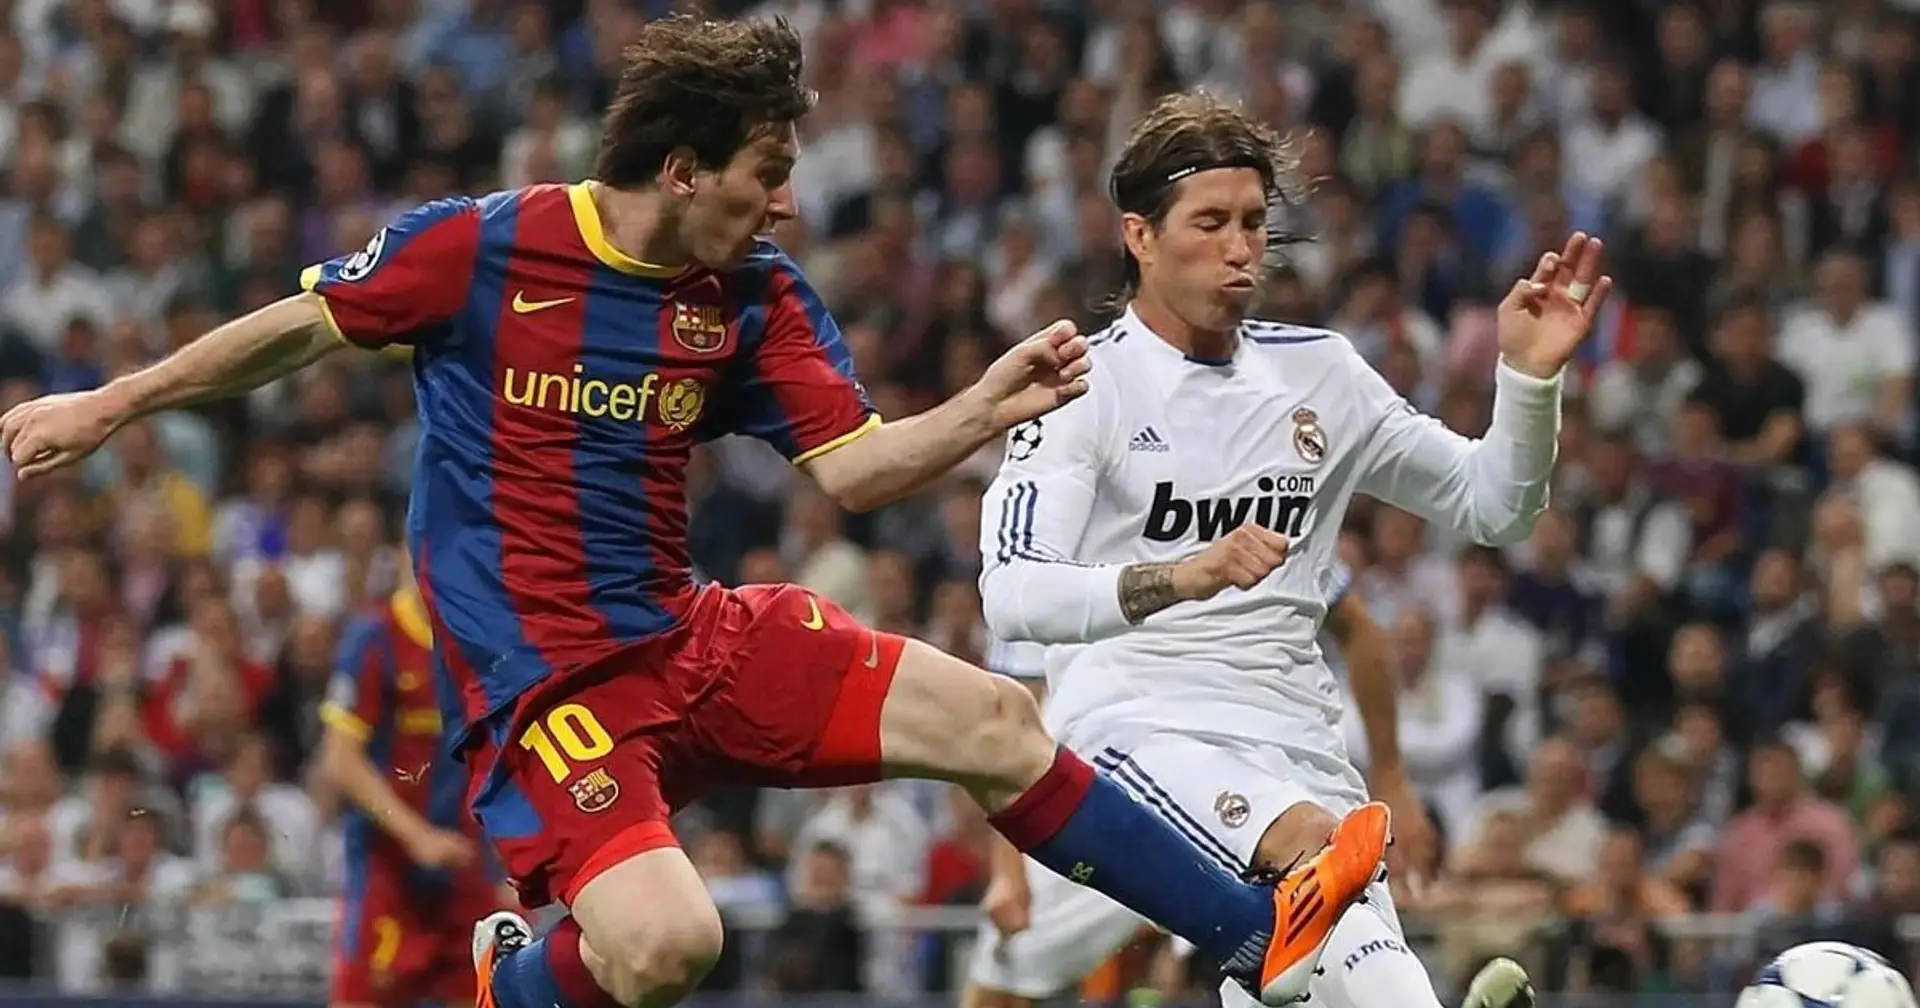 Fifth Champions League Clasico could be on cards if both Real Madrid and Barcelona win two more games